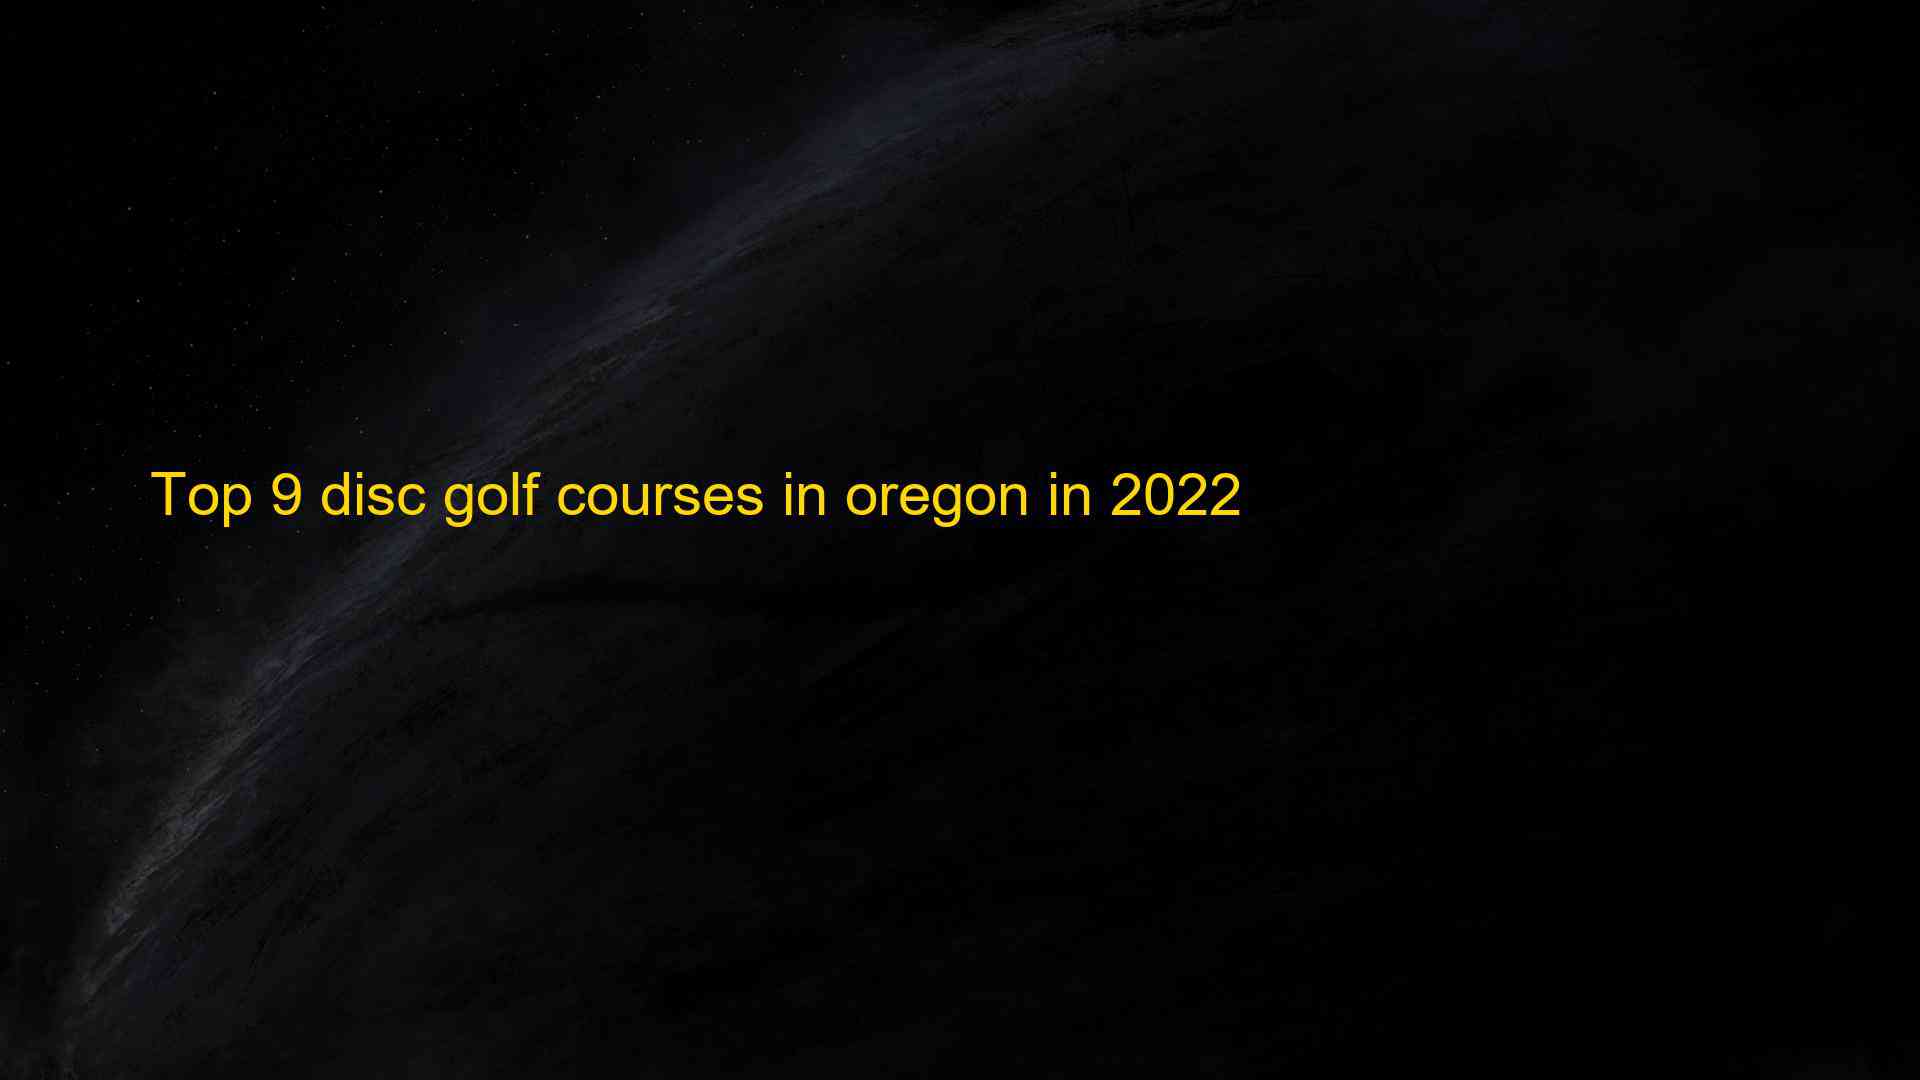 Top 9 disc golf courses in oregon in 2022 1661934513